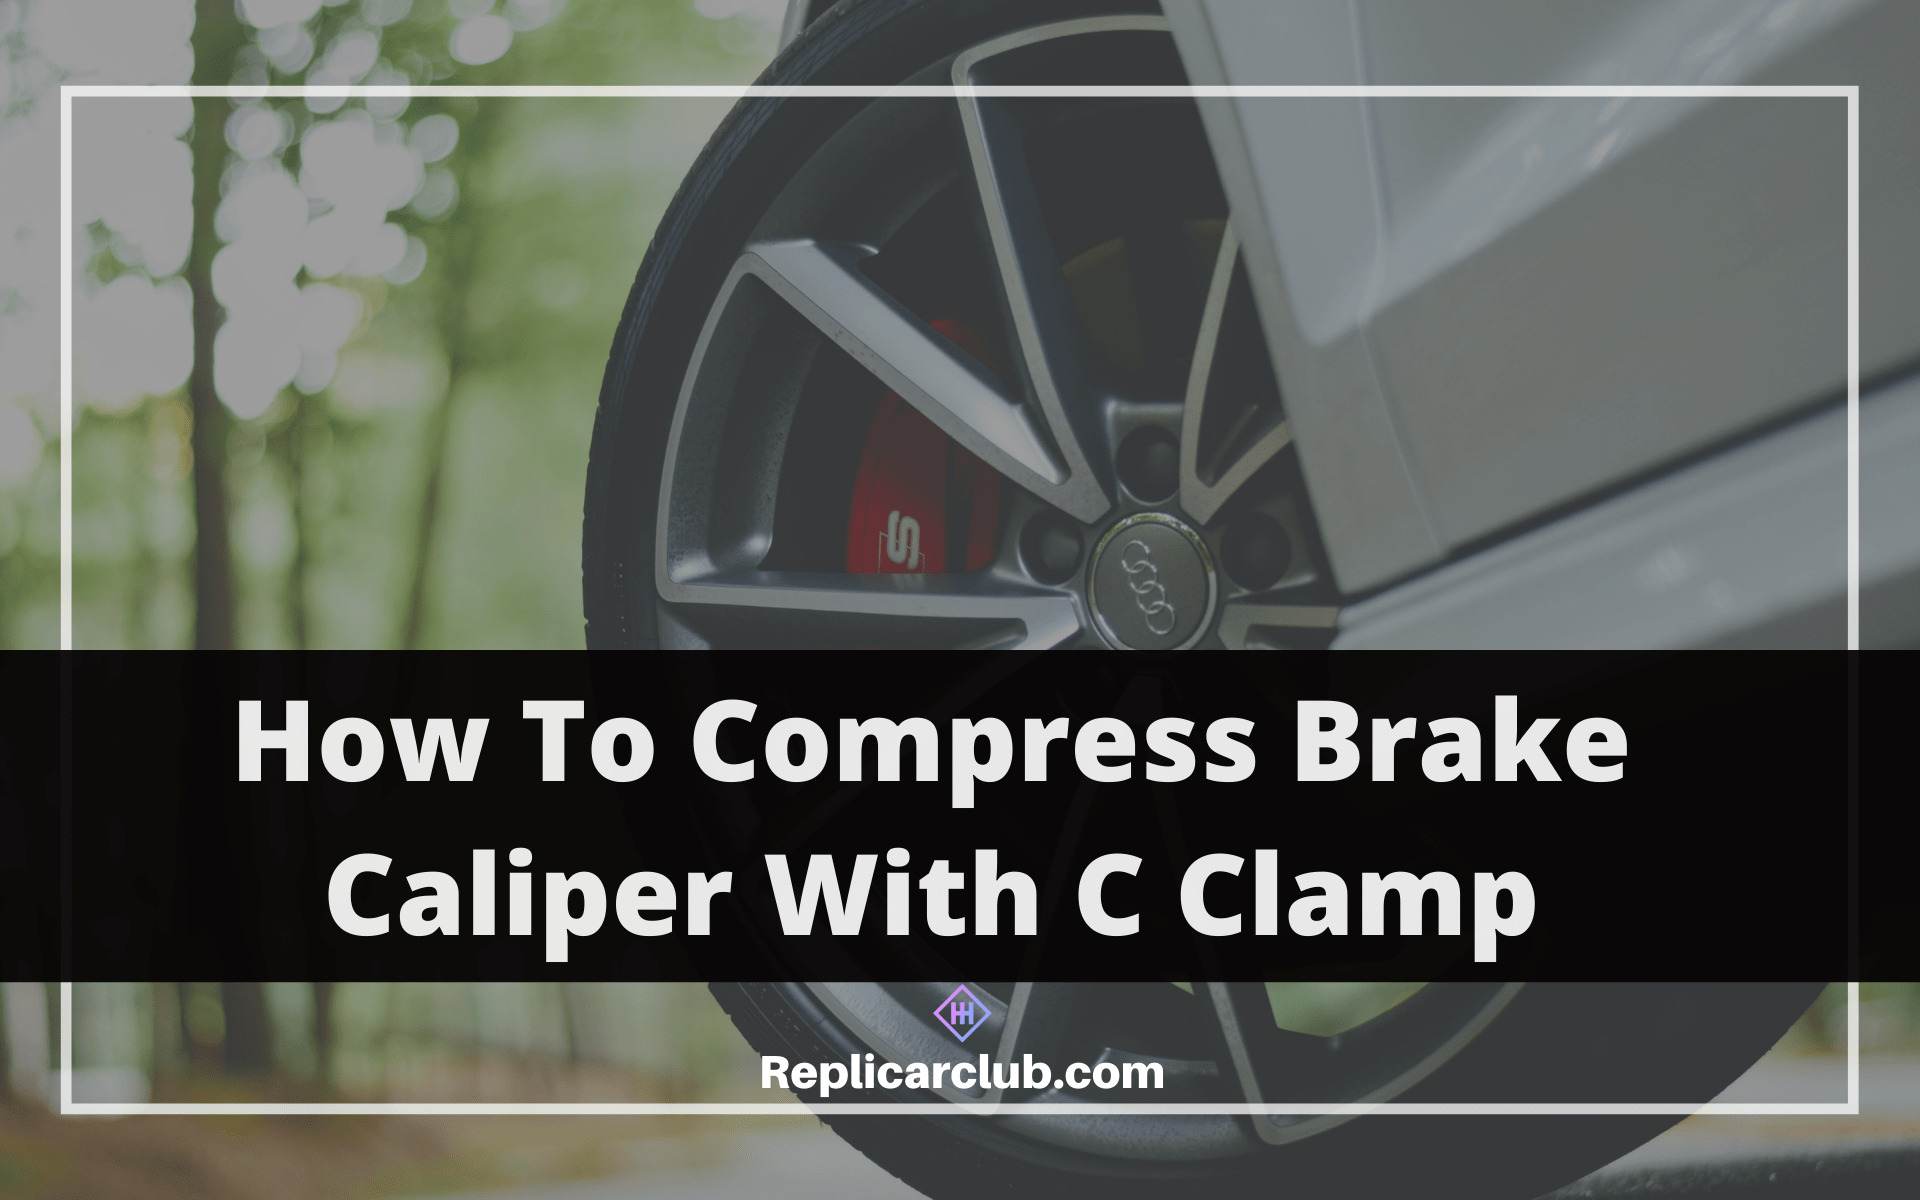 How To Compress Brake Caliper With C Clamp